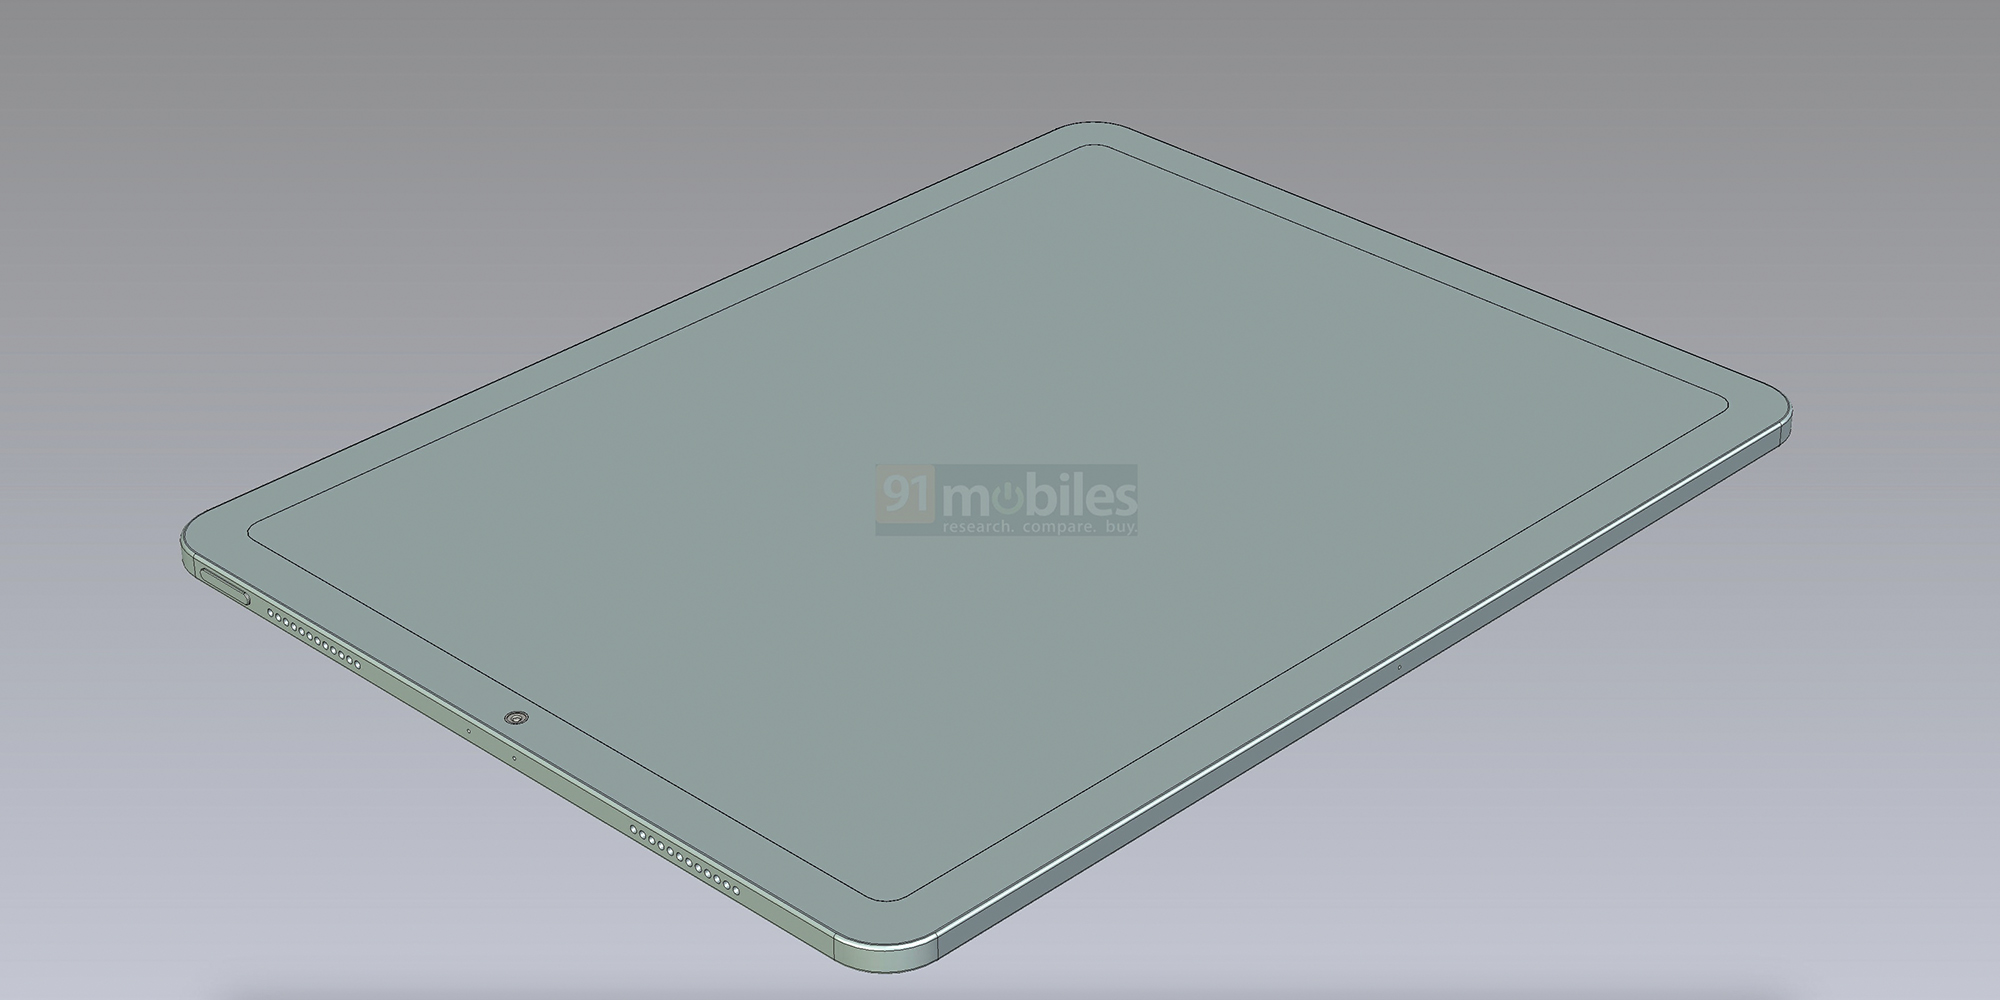 The leak revealed what the new iPad Air with a huge screen will be like